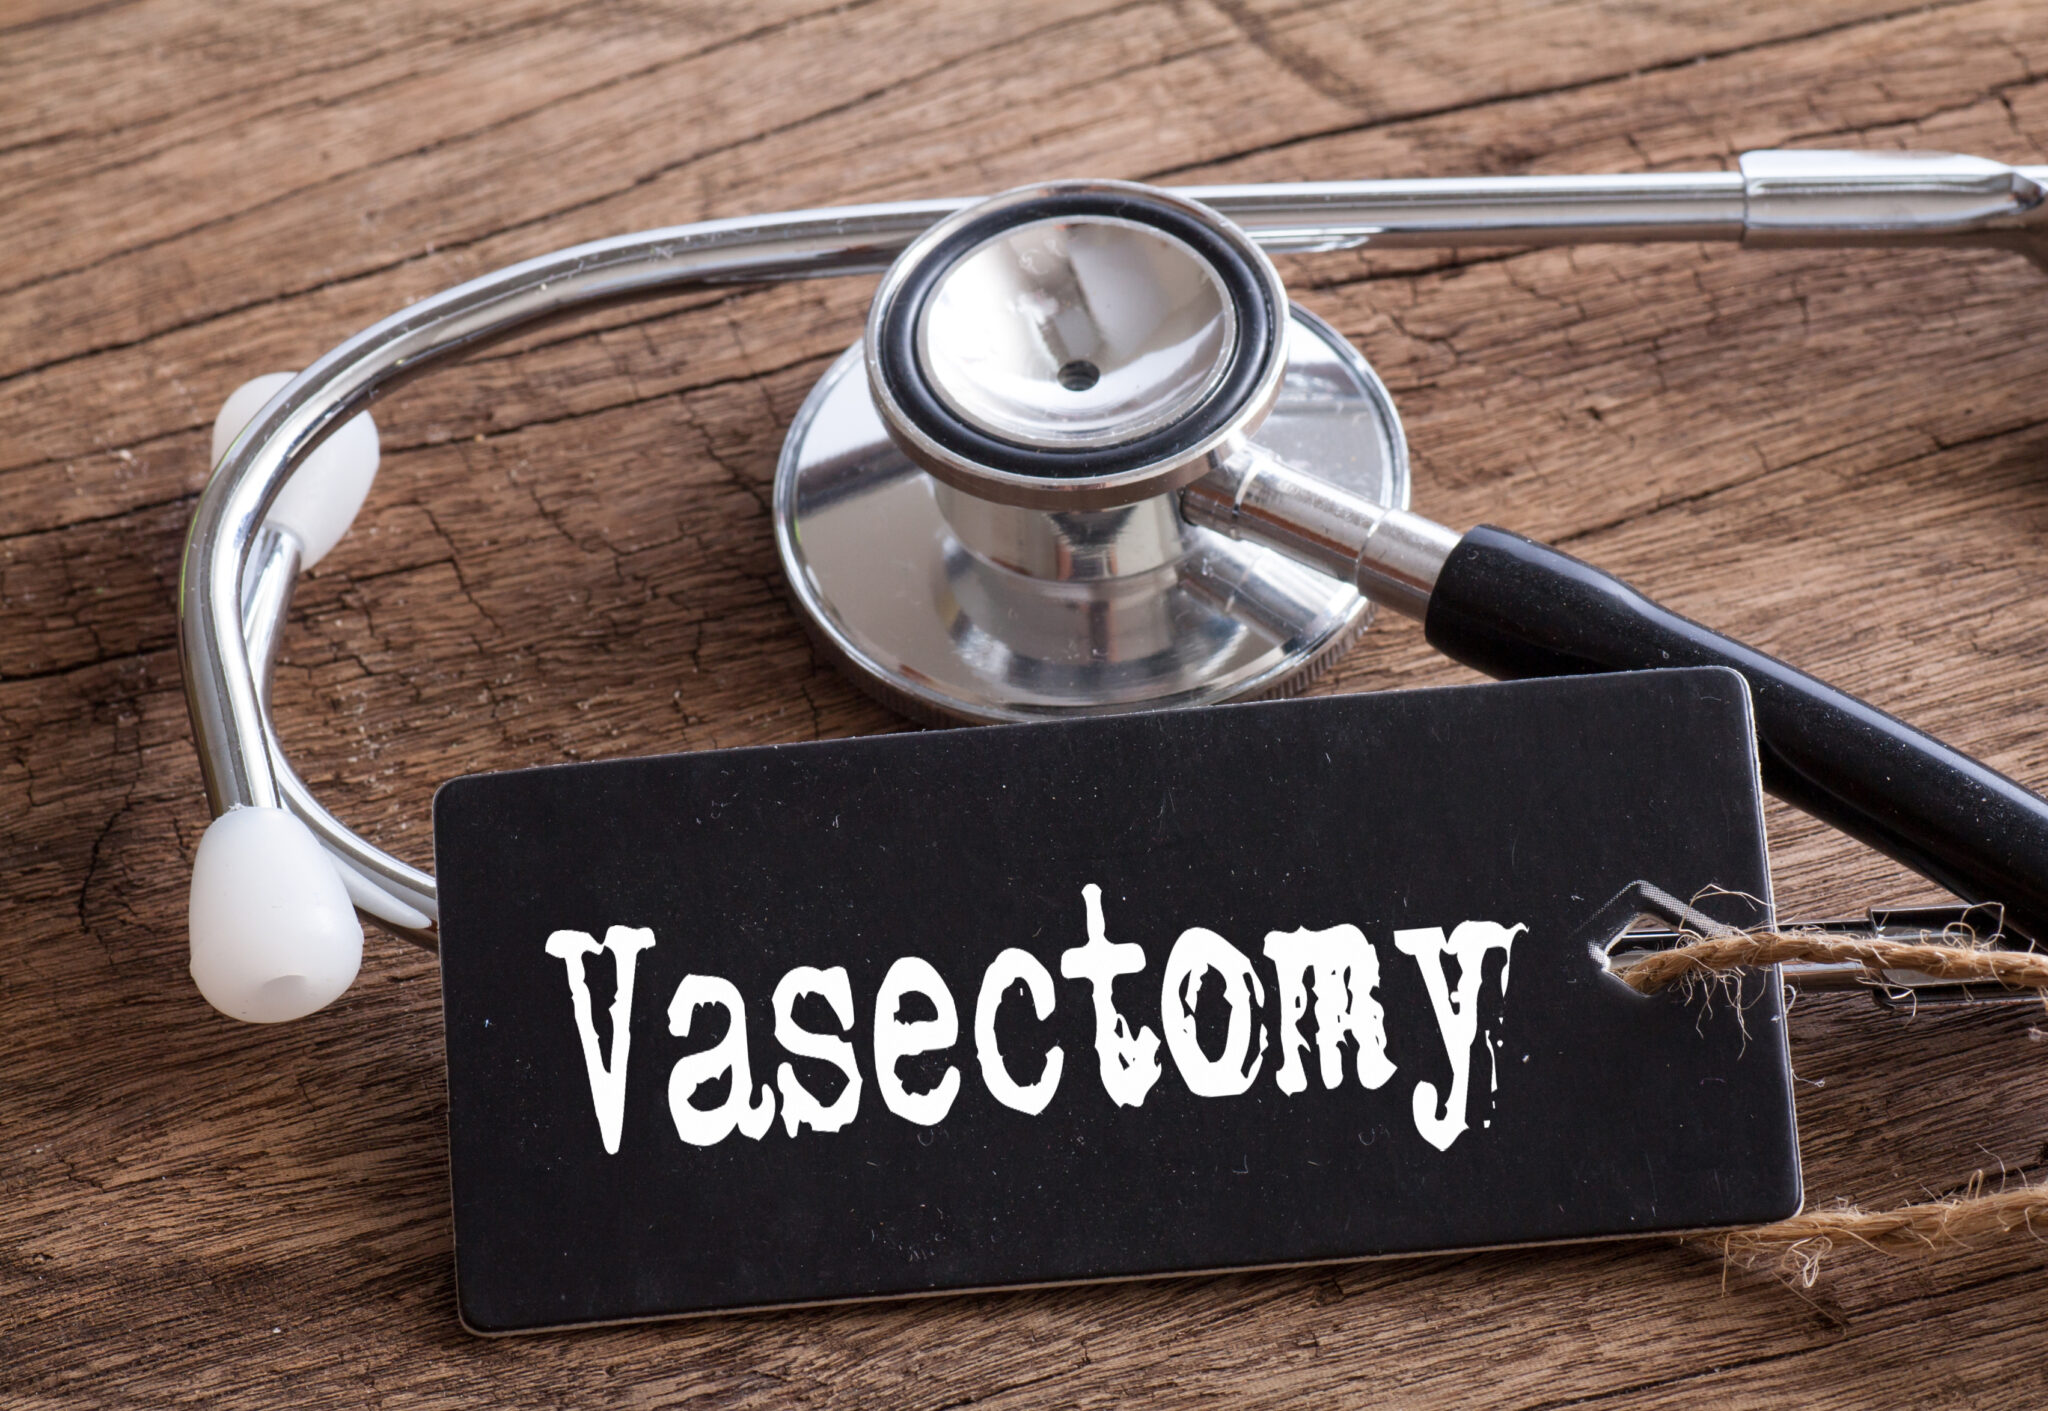 what kind of doctor does vasectomies?